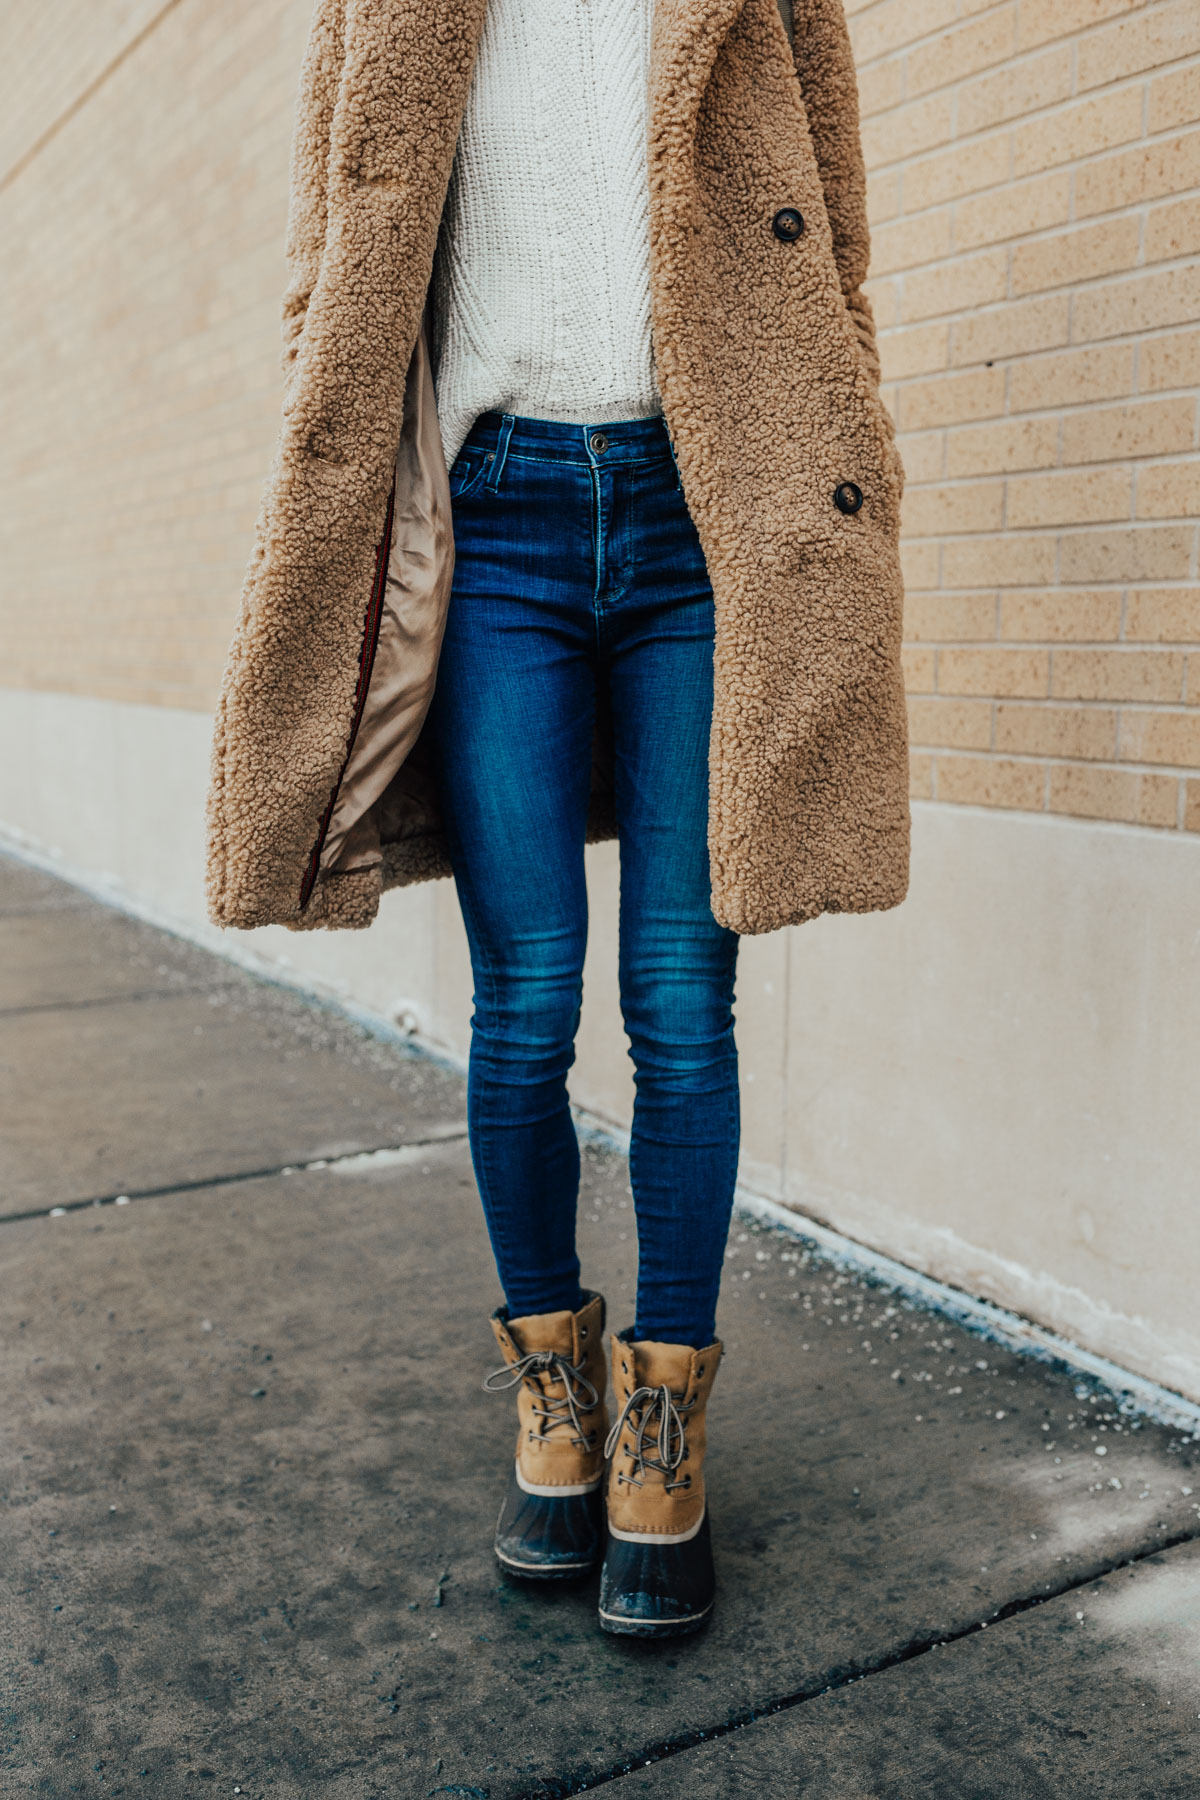 winter boots outfit